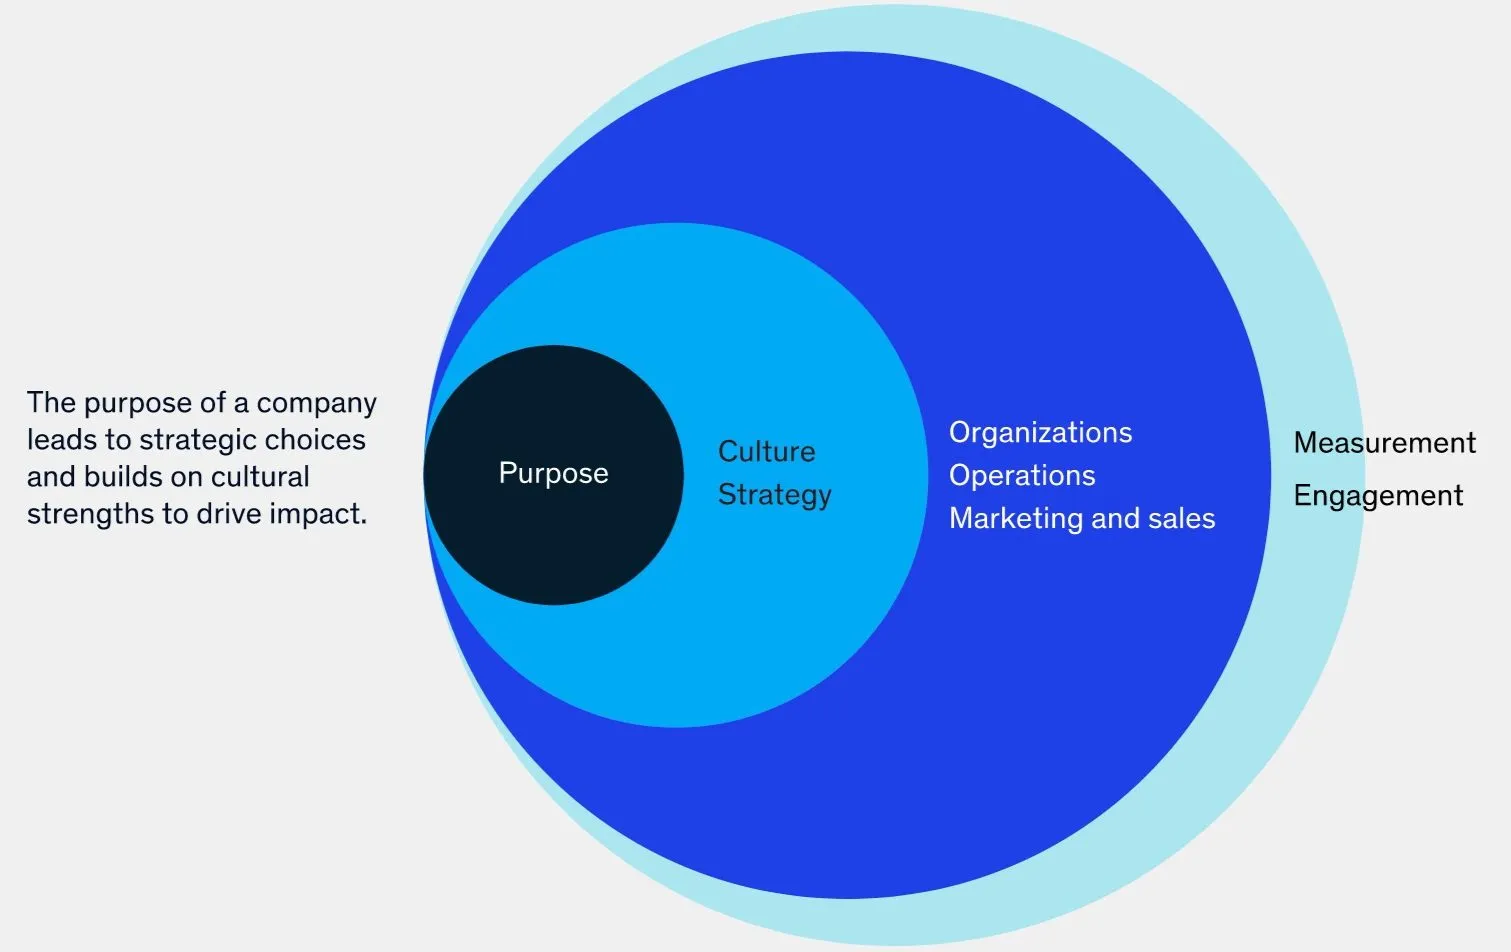 How corporate culture, purpose, and philosophy fits together. (Concentric circles)